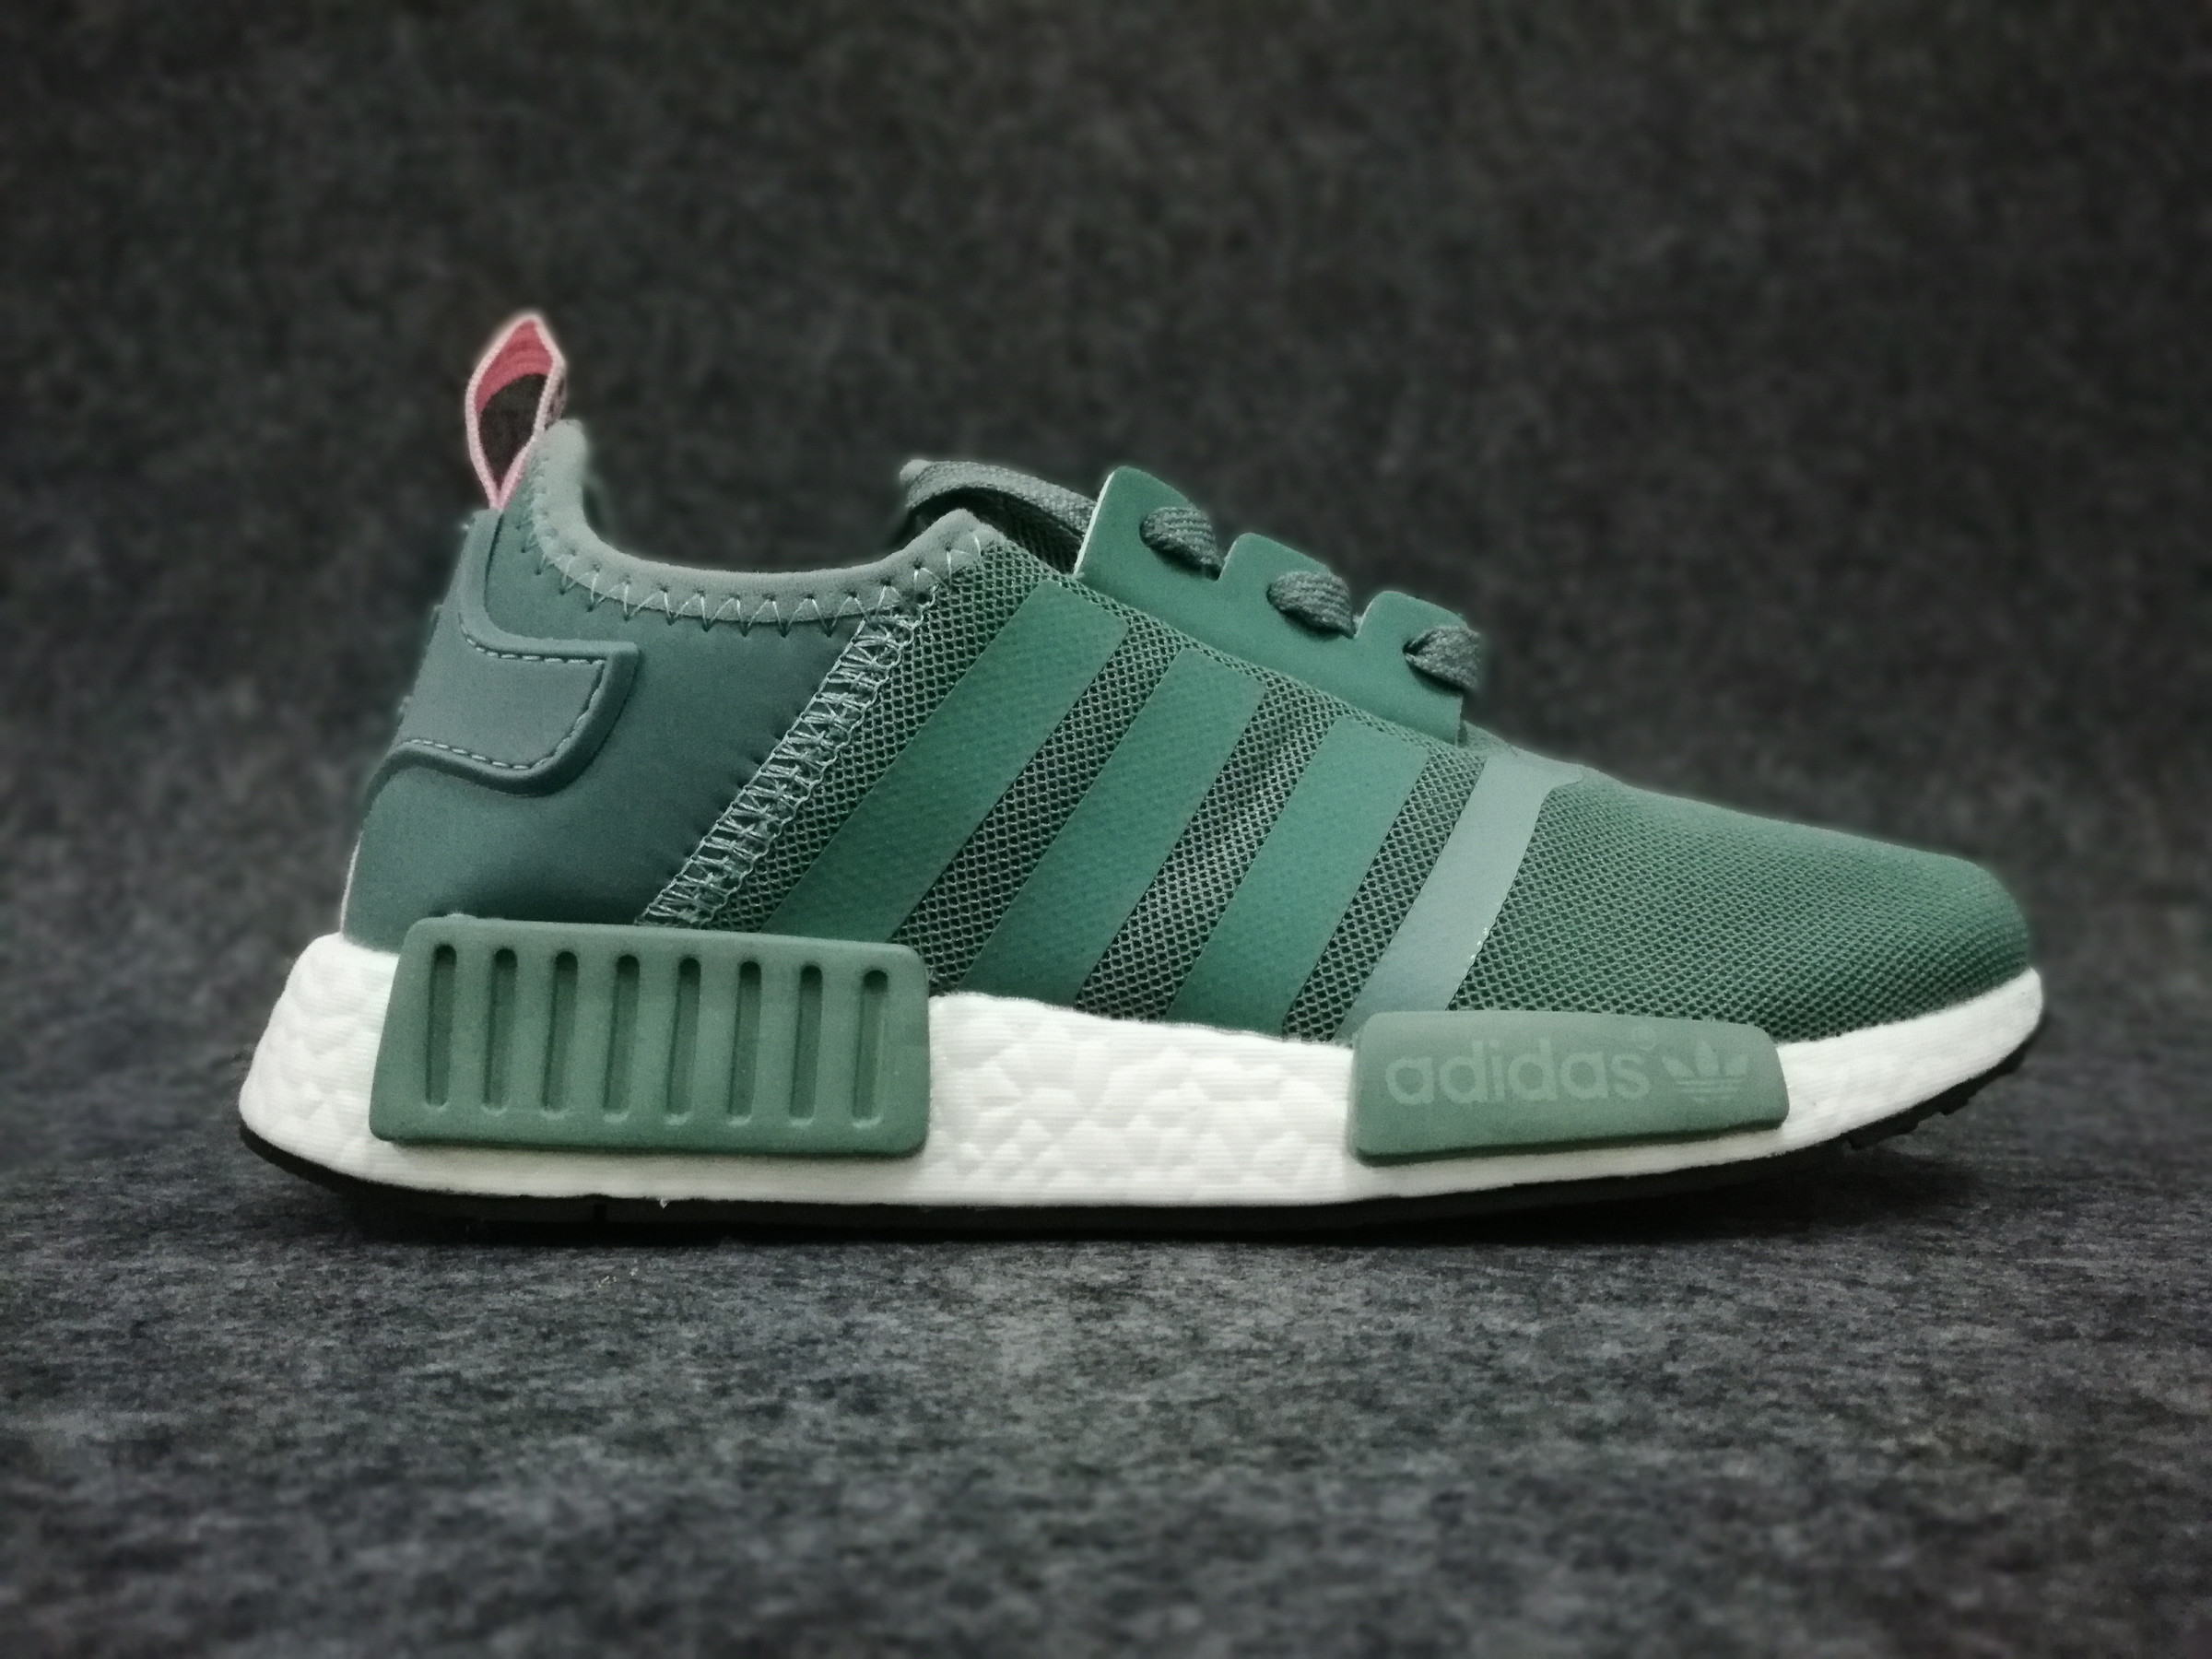 nmd green and pink